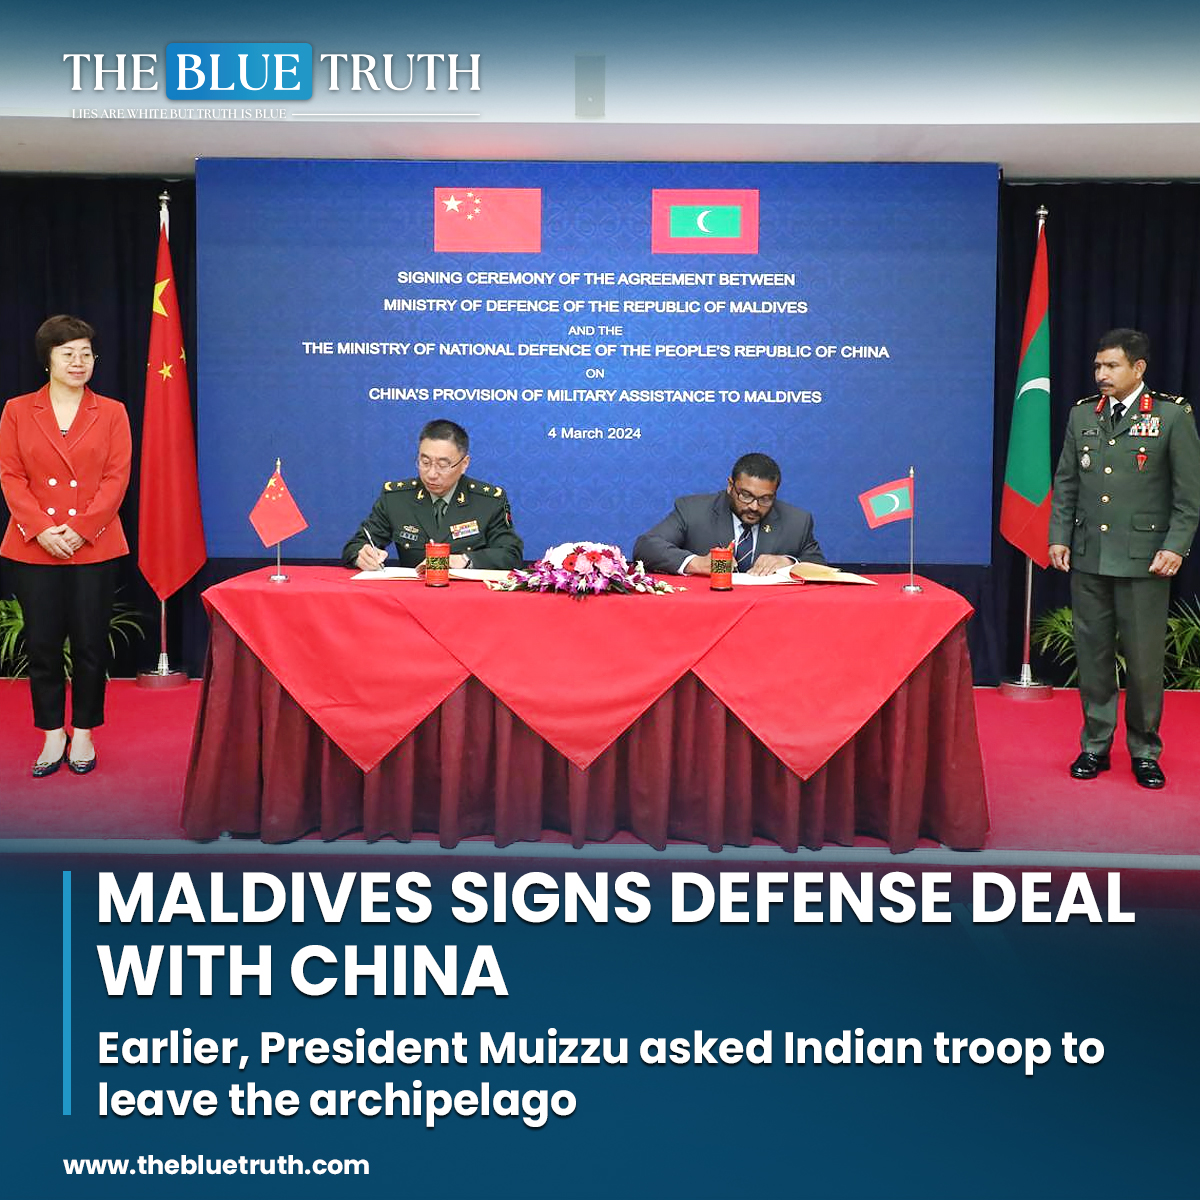 Maldives has asked Indian troops to leave the archipelago and inked a 'military assistance' pact with China.
#MaldivesChinaPact #MilitaryAssistance
#BilateralTies #IndiaRelations #Geopolitics
#ForeignPolicy #tbt #thebluetruth